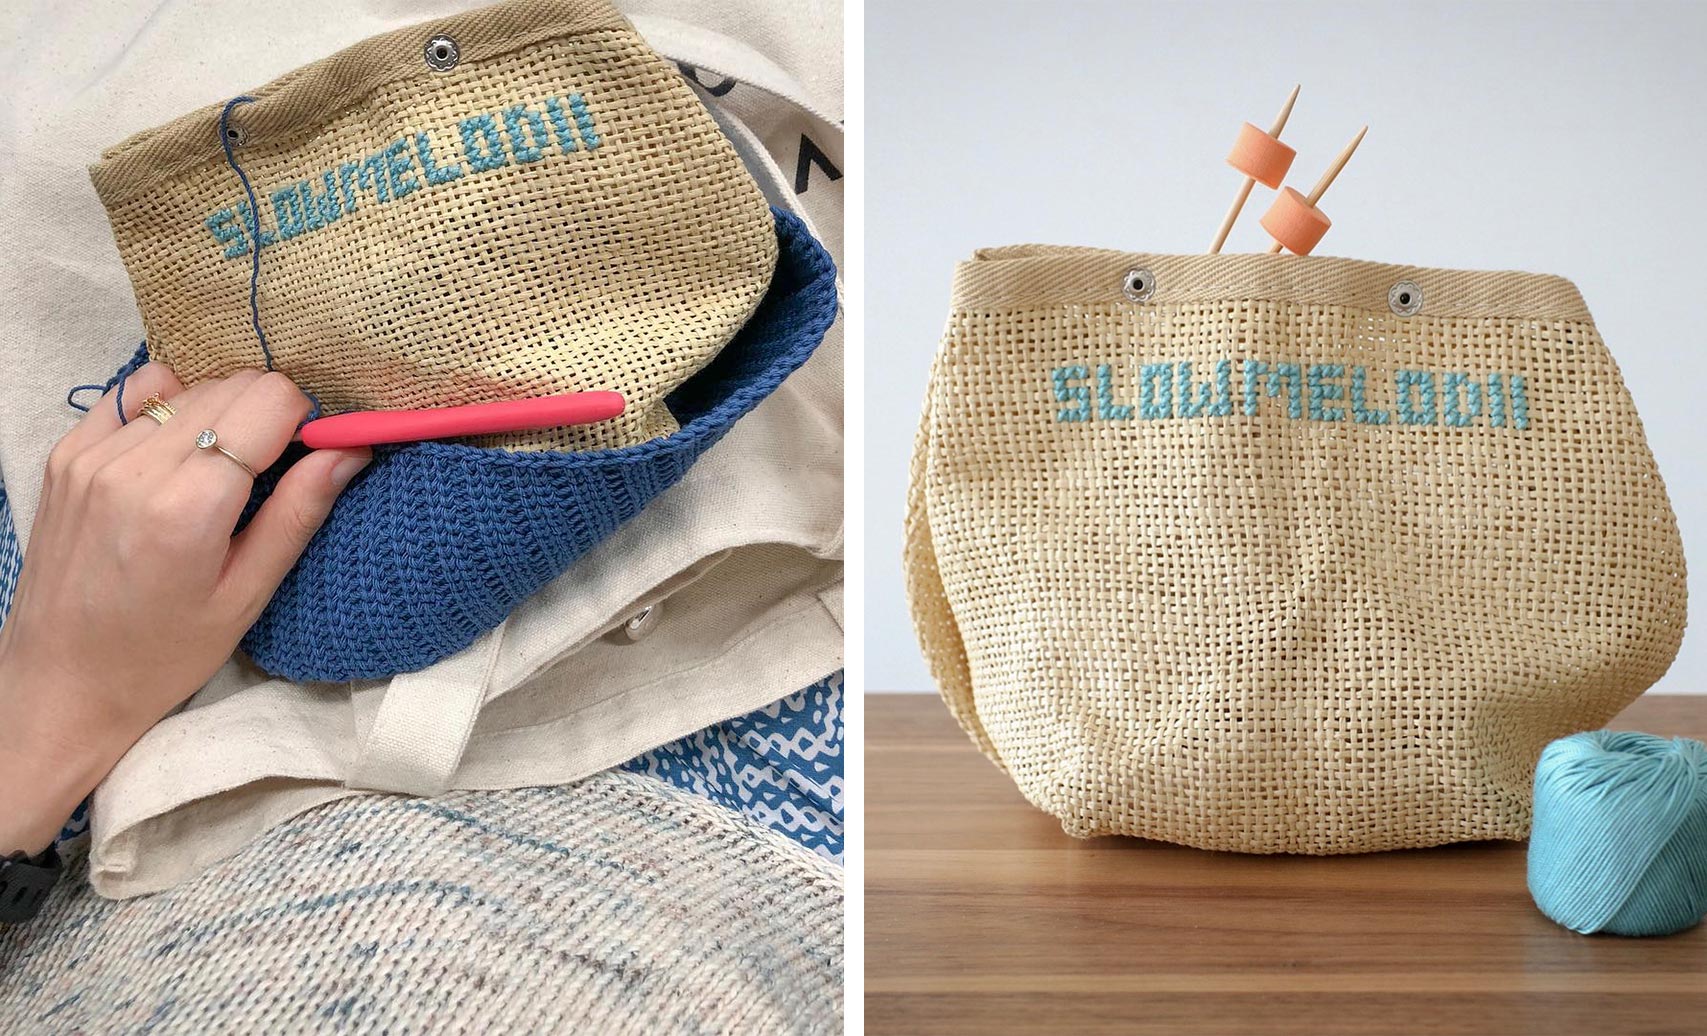 Cross-Stitch Your Mesh Bag – Cocoknits